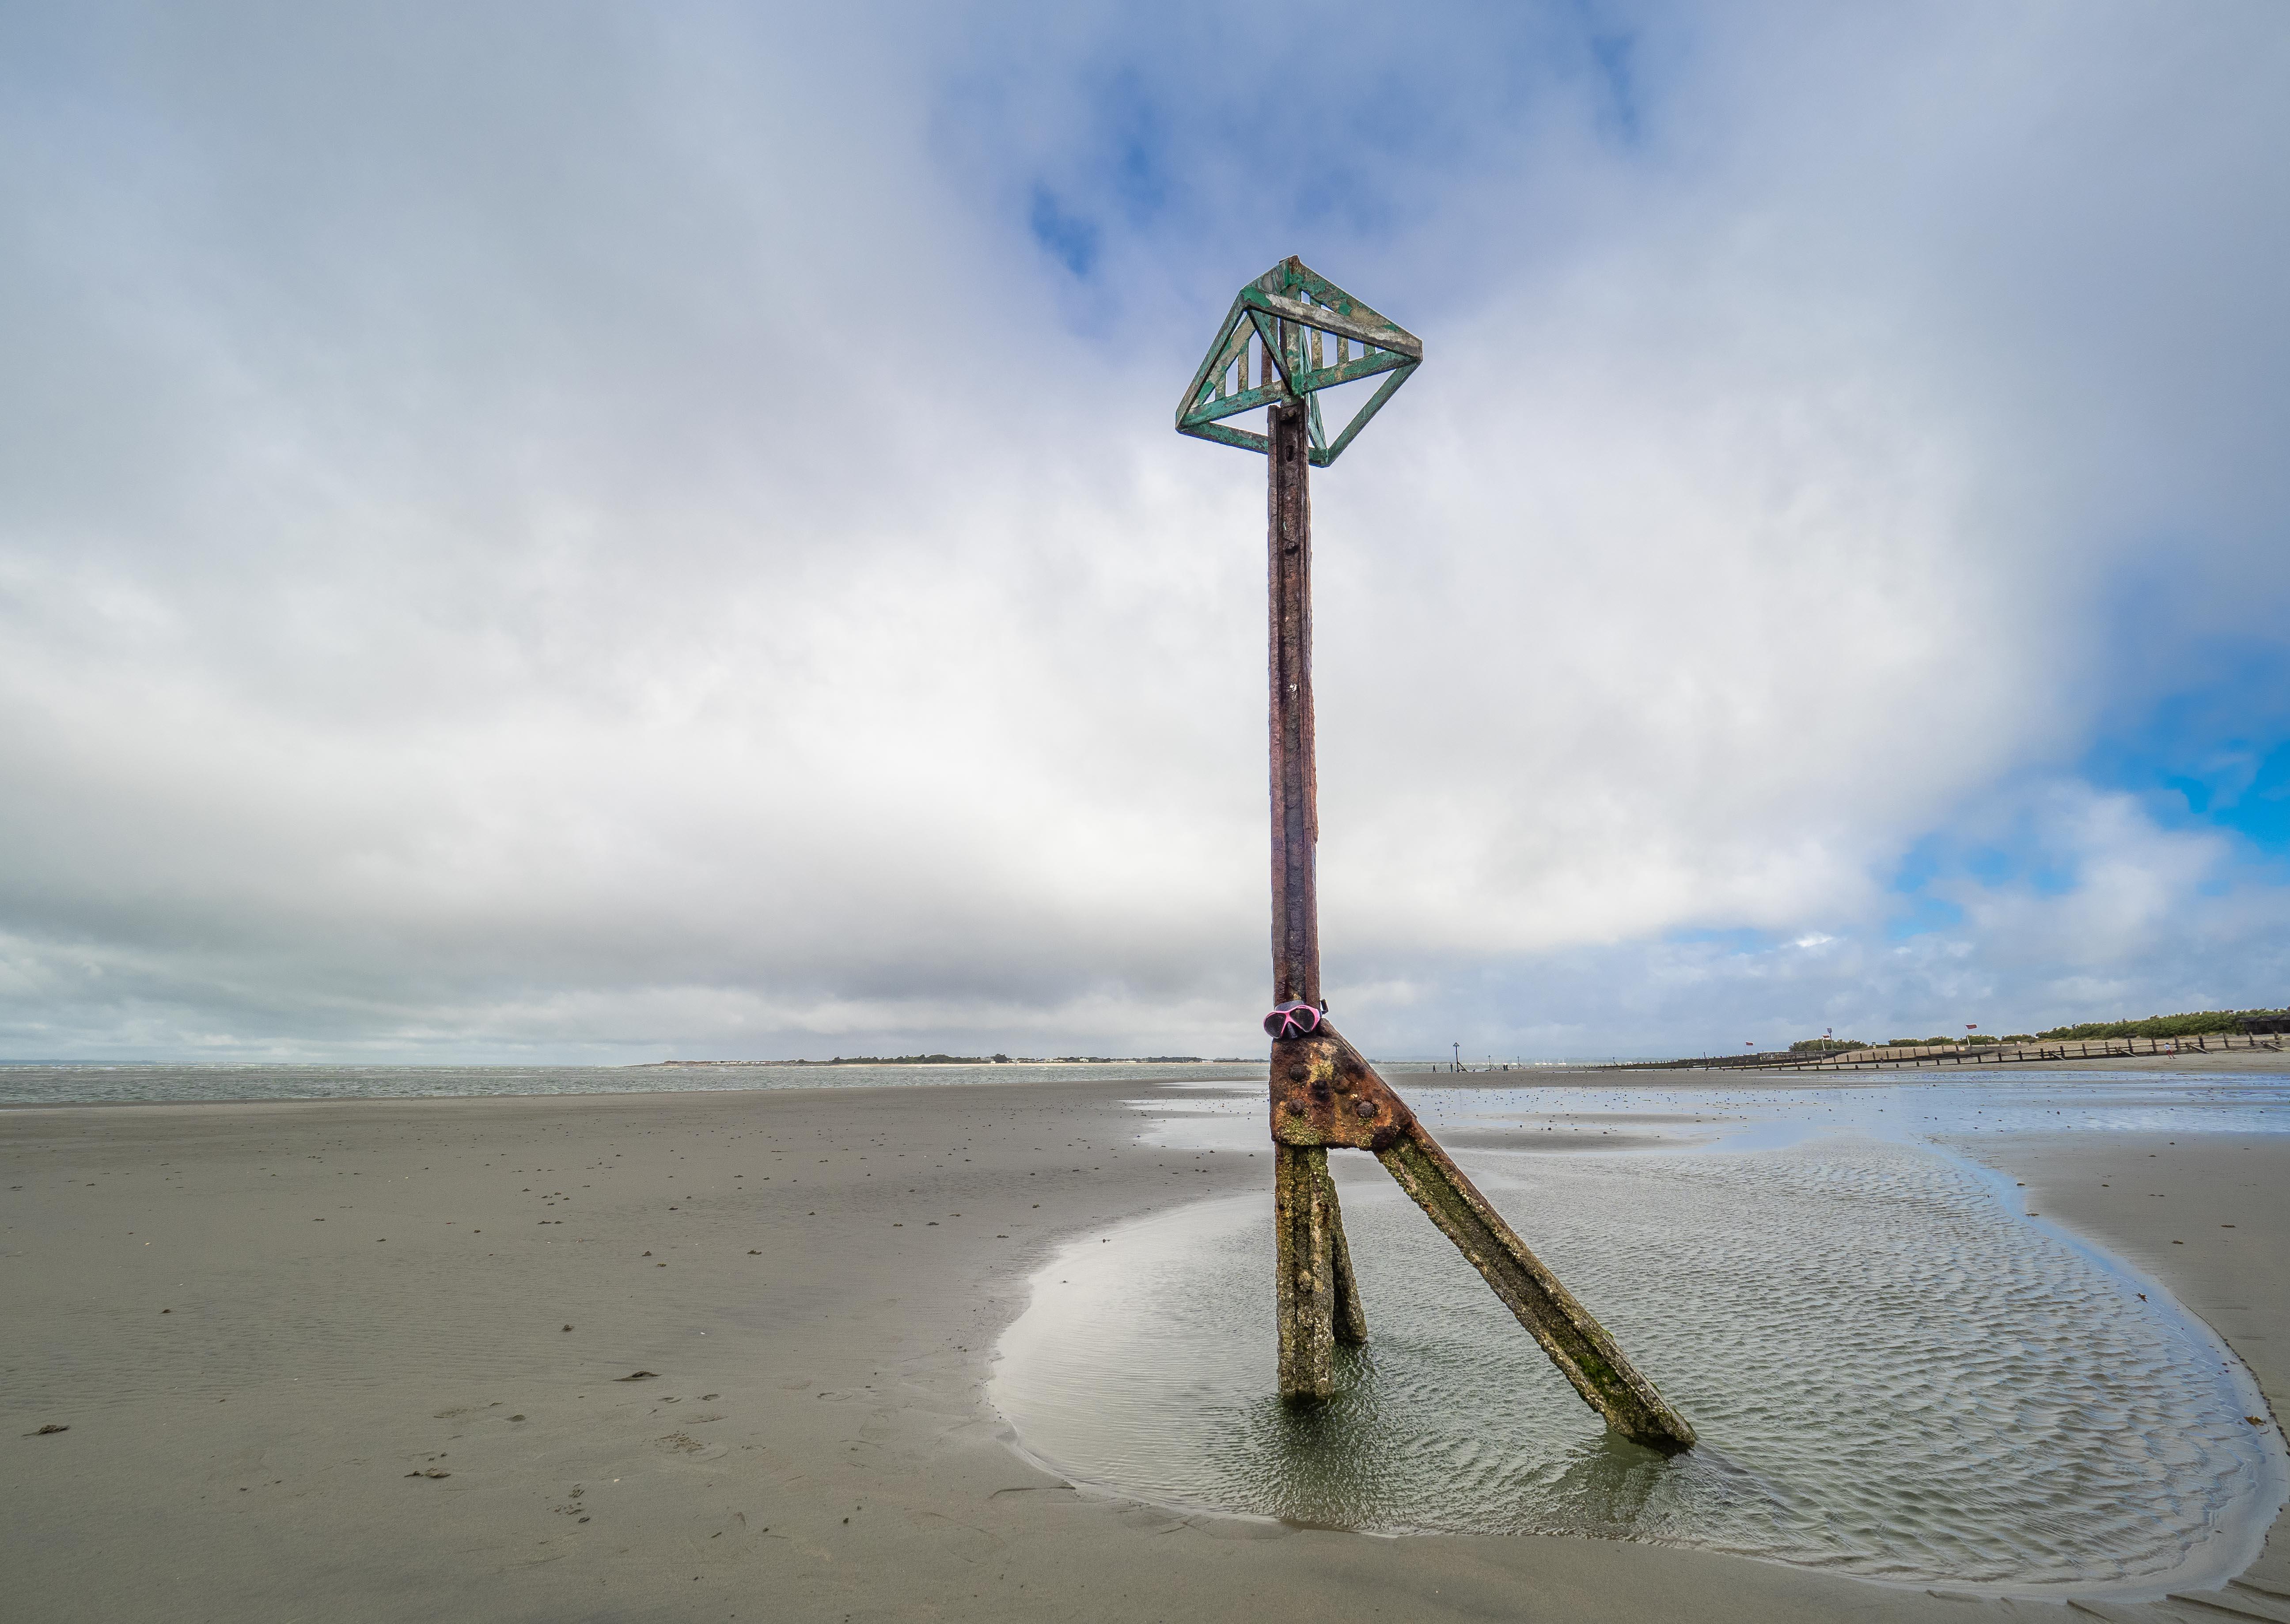 Lost Goggles is a print taken at West Wittering Beach in July 2020. It's a fun shot of one of the rusting navigational posts that warns boats away from the shoreline due to the low sea level. 